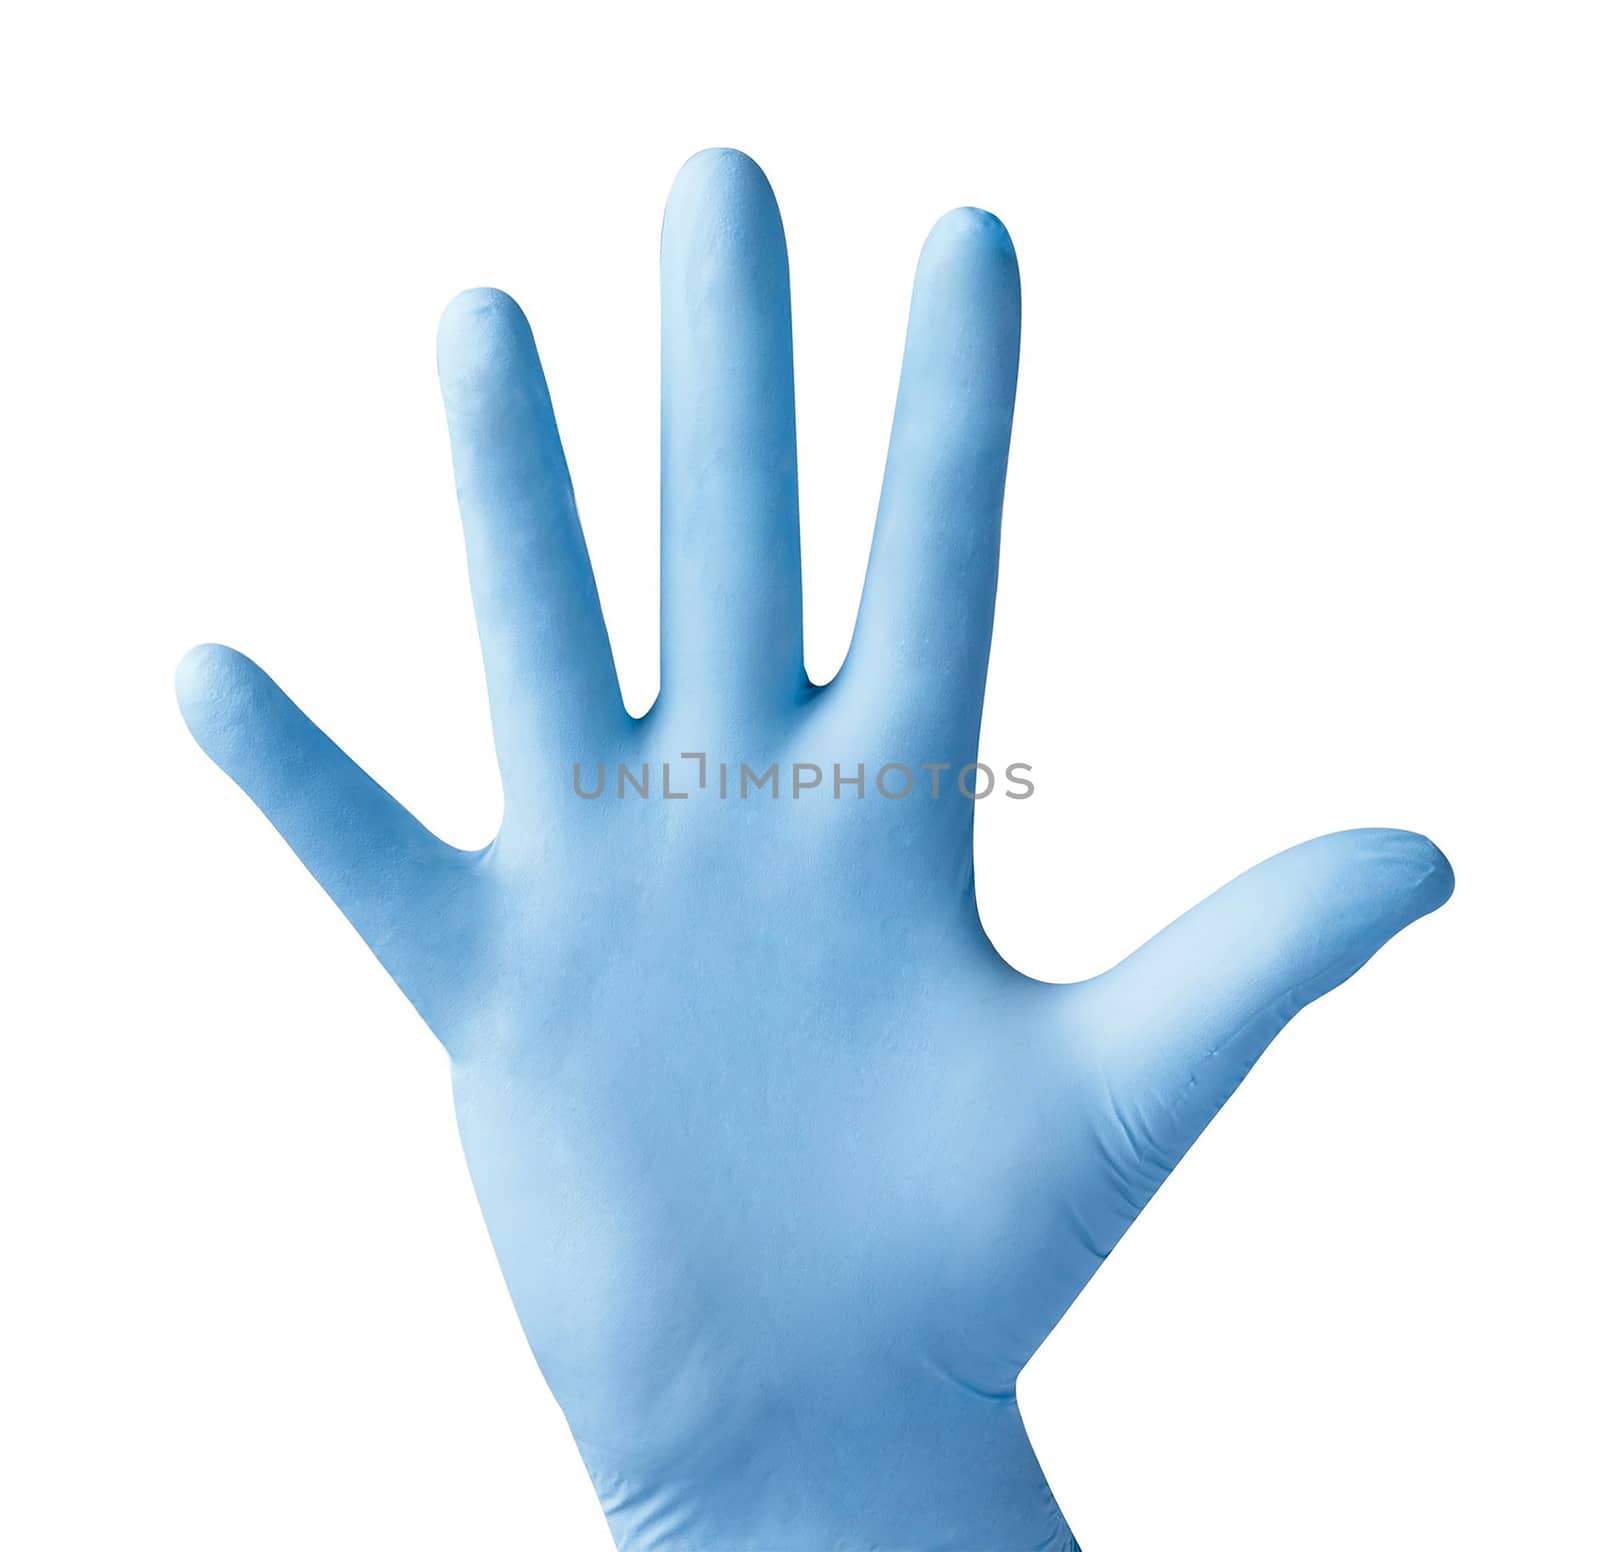 household protective rubber glove isolated on white background